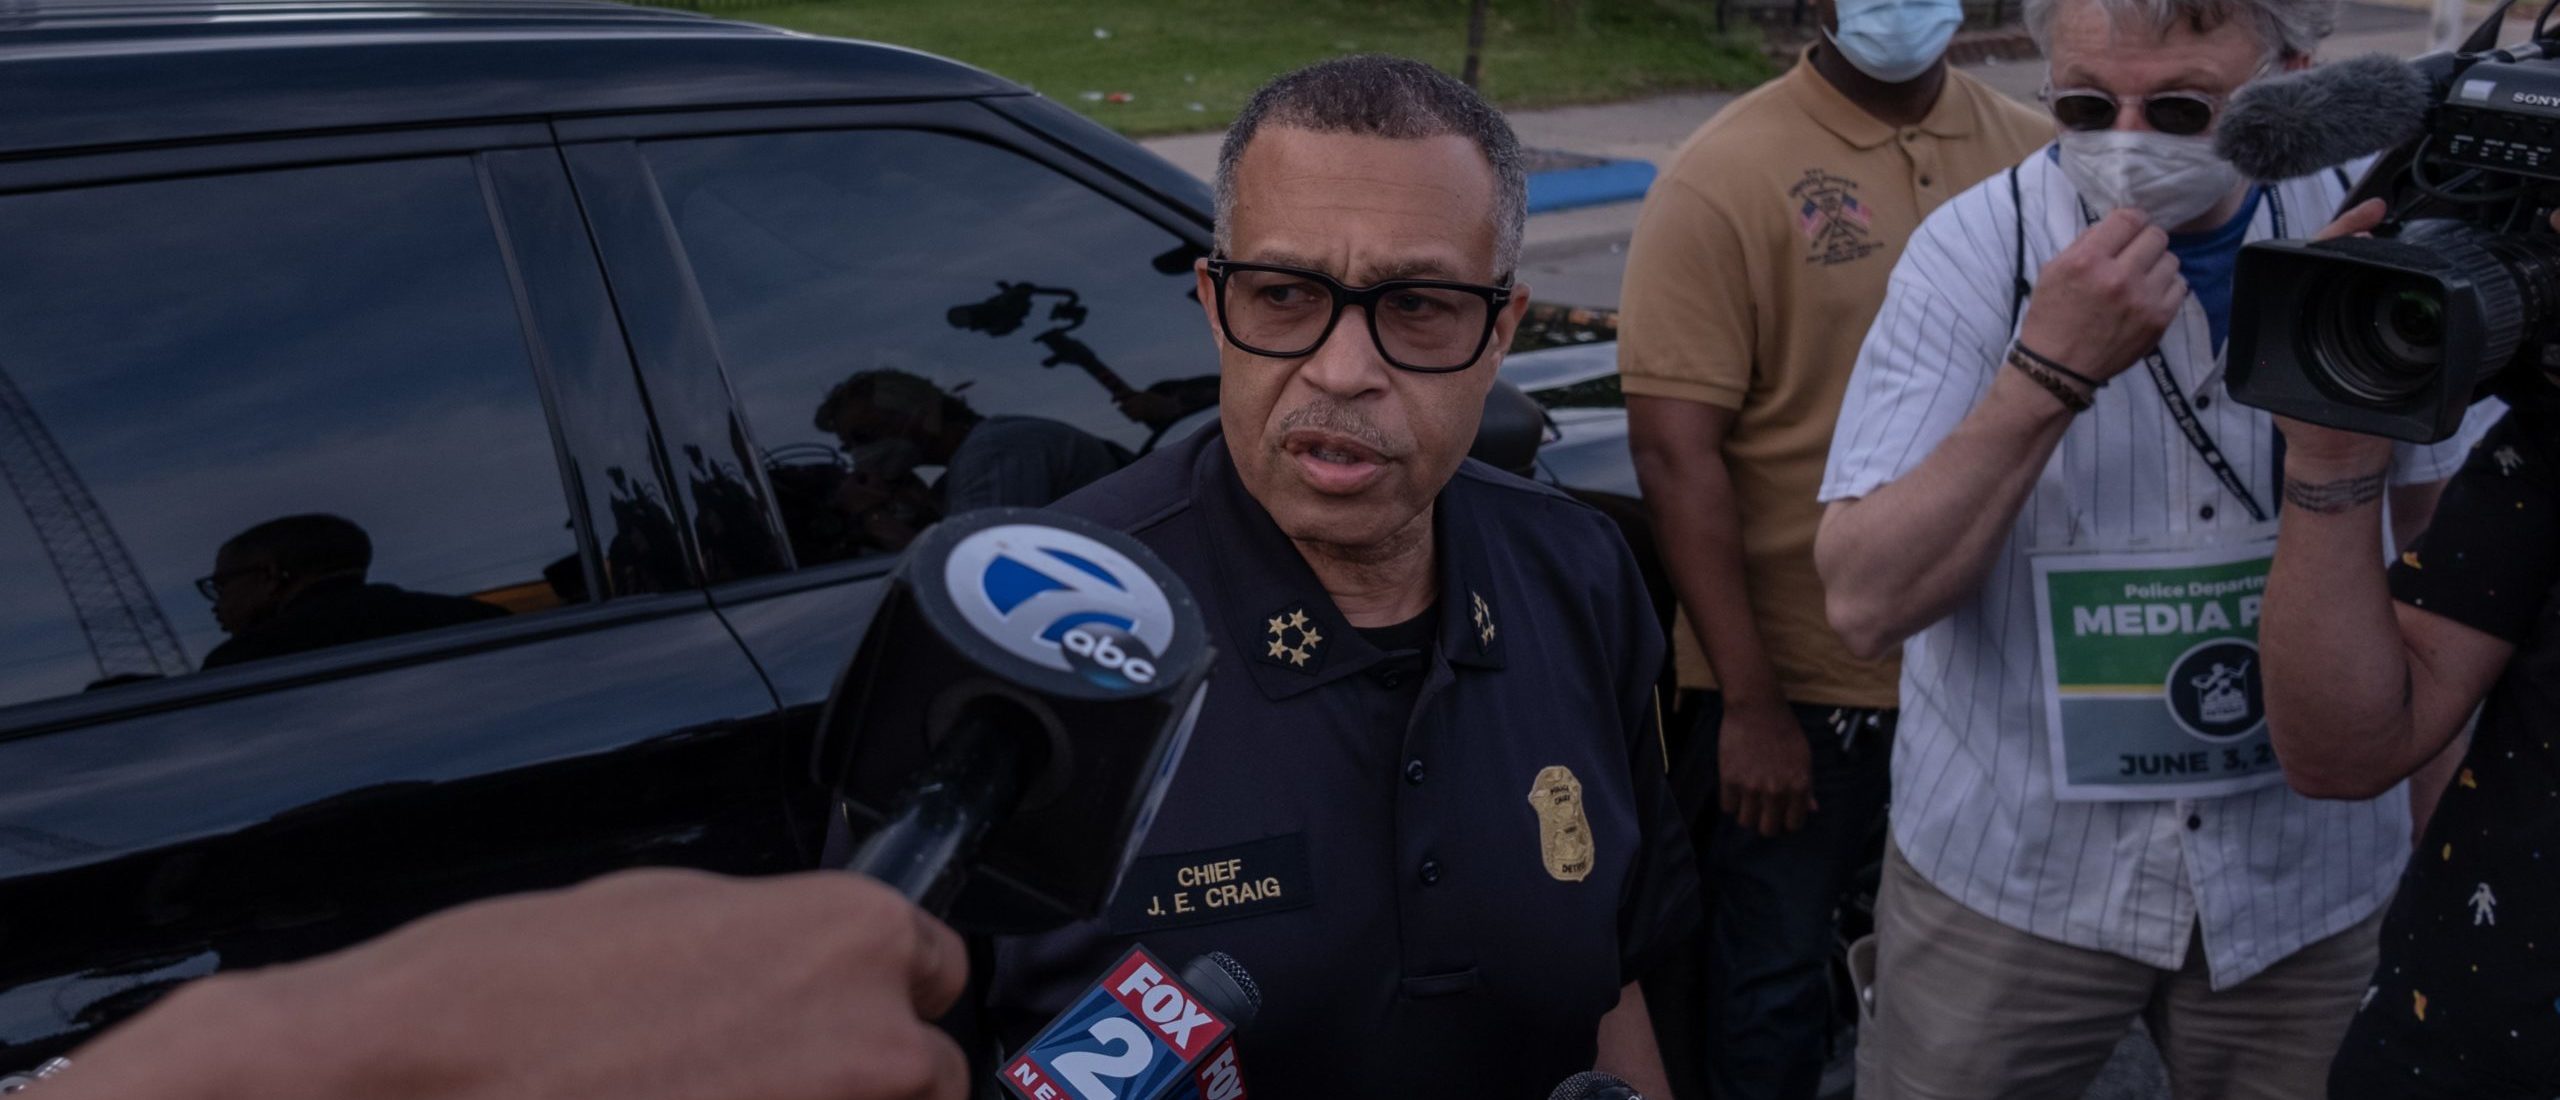 The Chief of Detroit Police James Craig speaks with the press about the protests taking place in Detroit, Michigan, June 3,2020 - The Chief of Detroit Police James Craig later ended the curfew after protesters called for an end to the curfew. (Photo by SETH HERALD / AFP) (Photo by SETH HERALD/AFP via Getty Images)